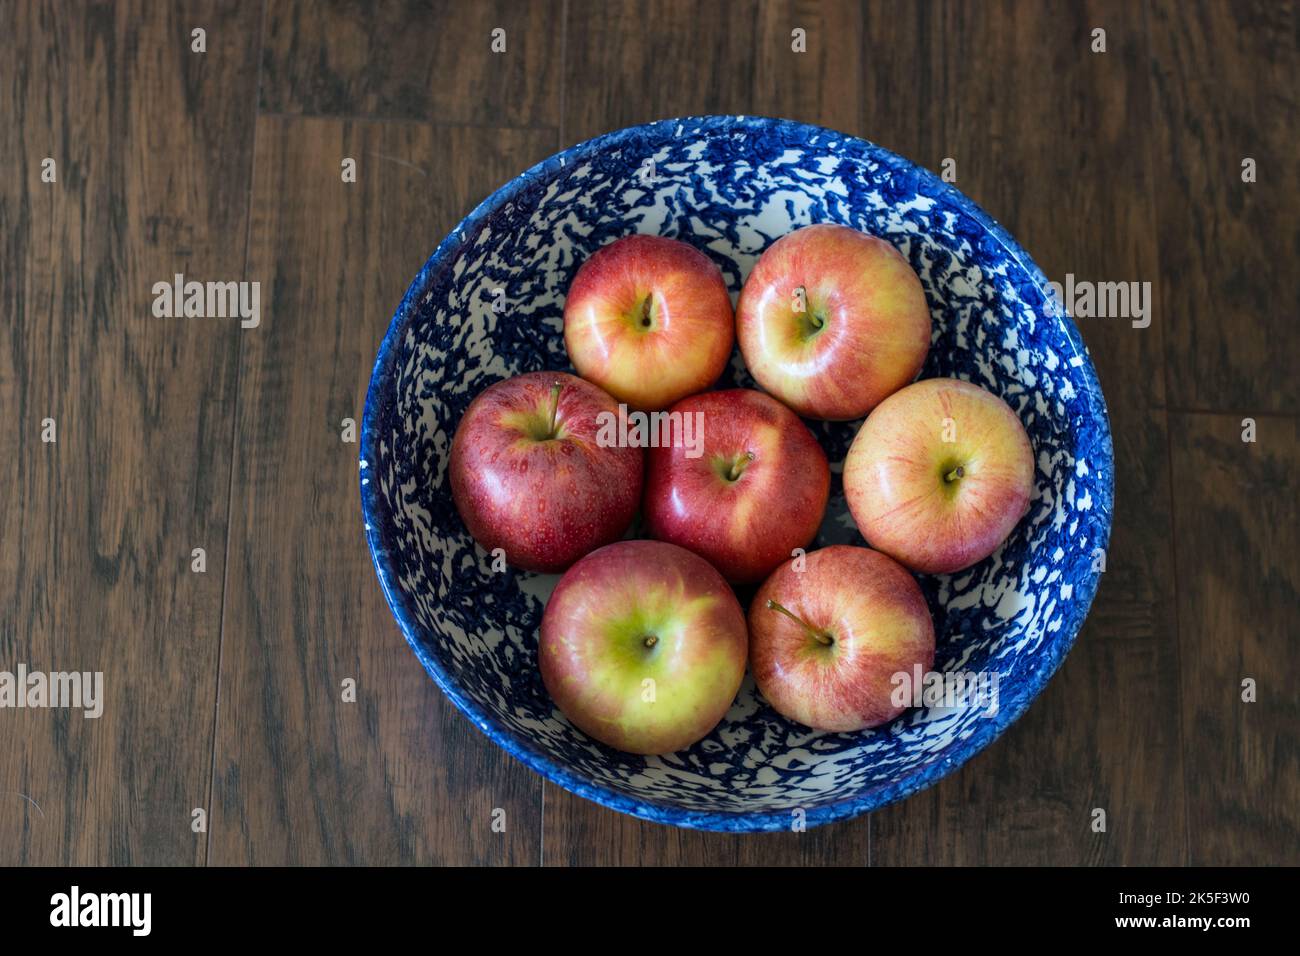 a blue bowl filled with red apples Stock Photo